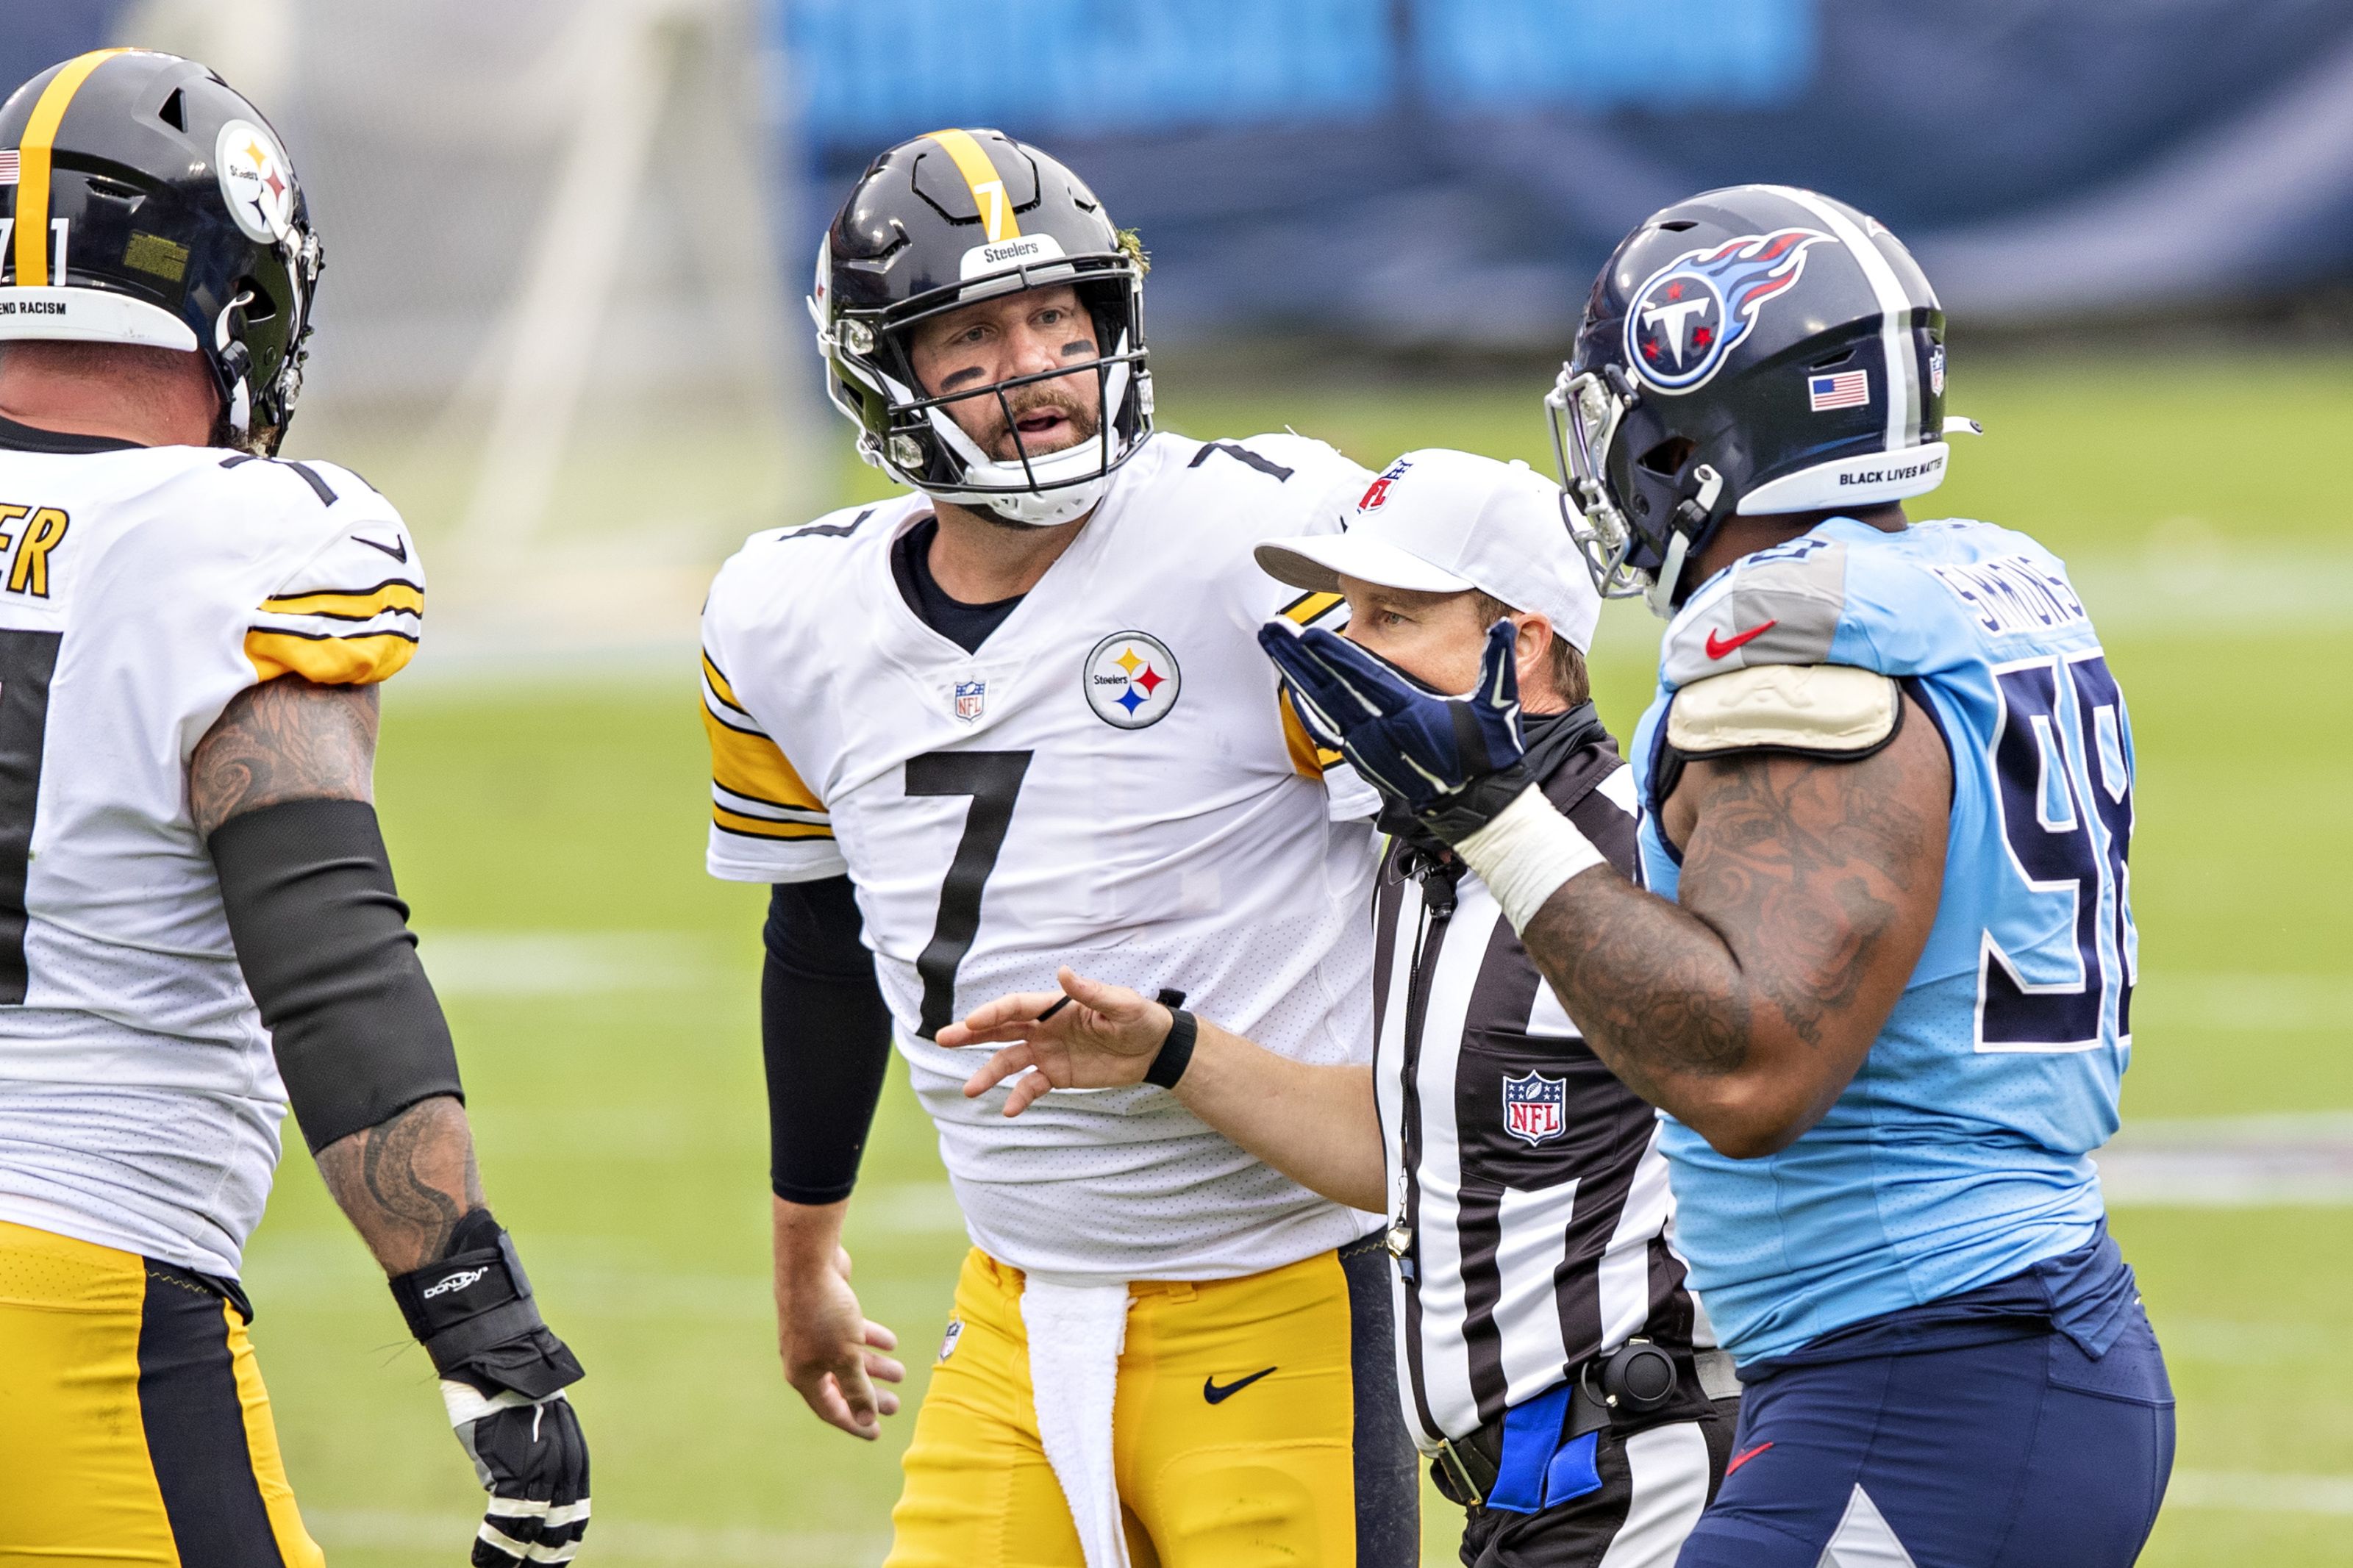 PITTSBURGH STEELERS VS. TENNESSEE TITANS Prediction, Betting Tips & Odds │19 DECEMBER, 2021